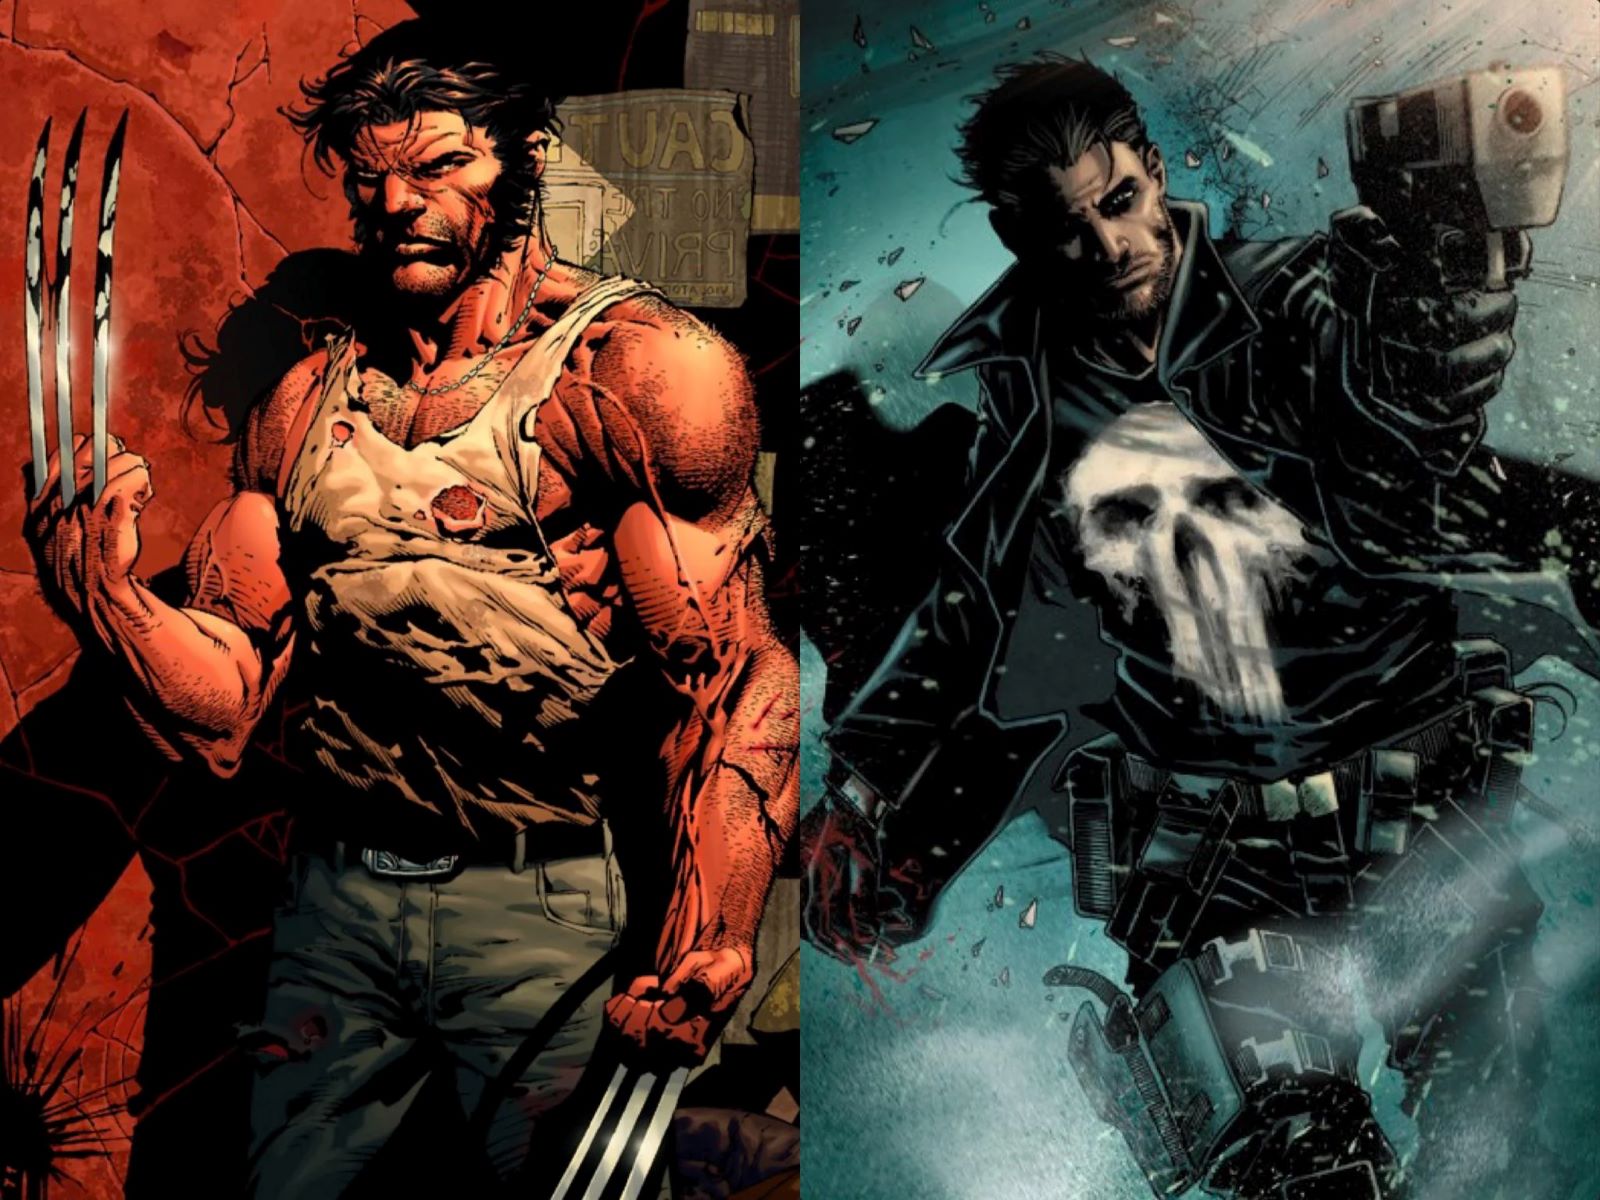 Epic Showdown: Punisher Vs. Wolverine - Who Will Emerge Victorious?